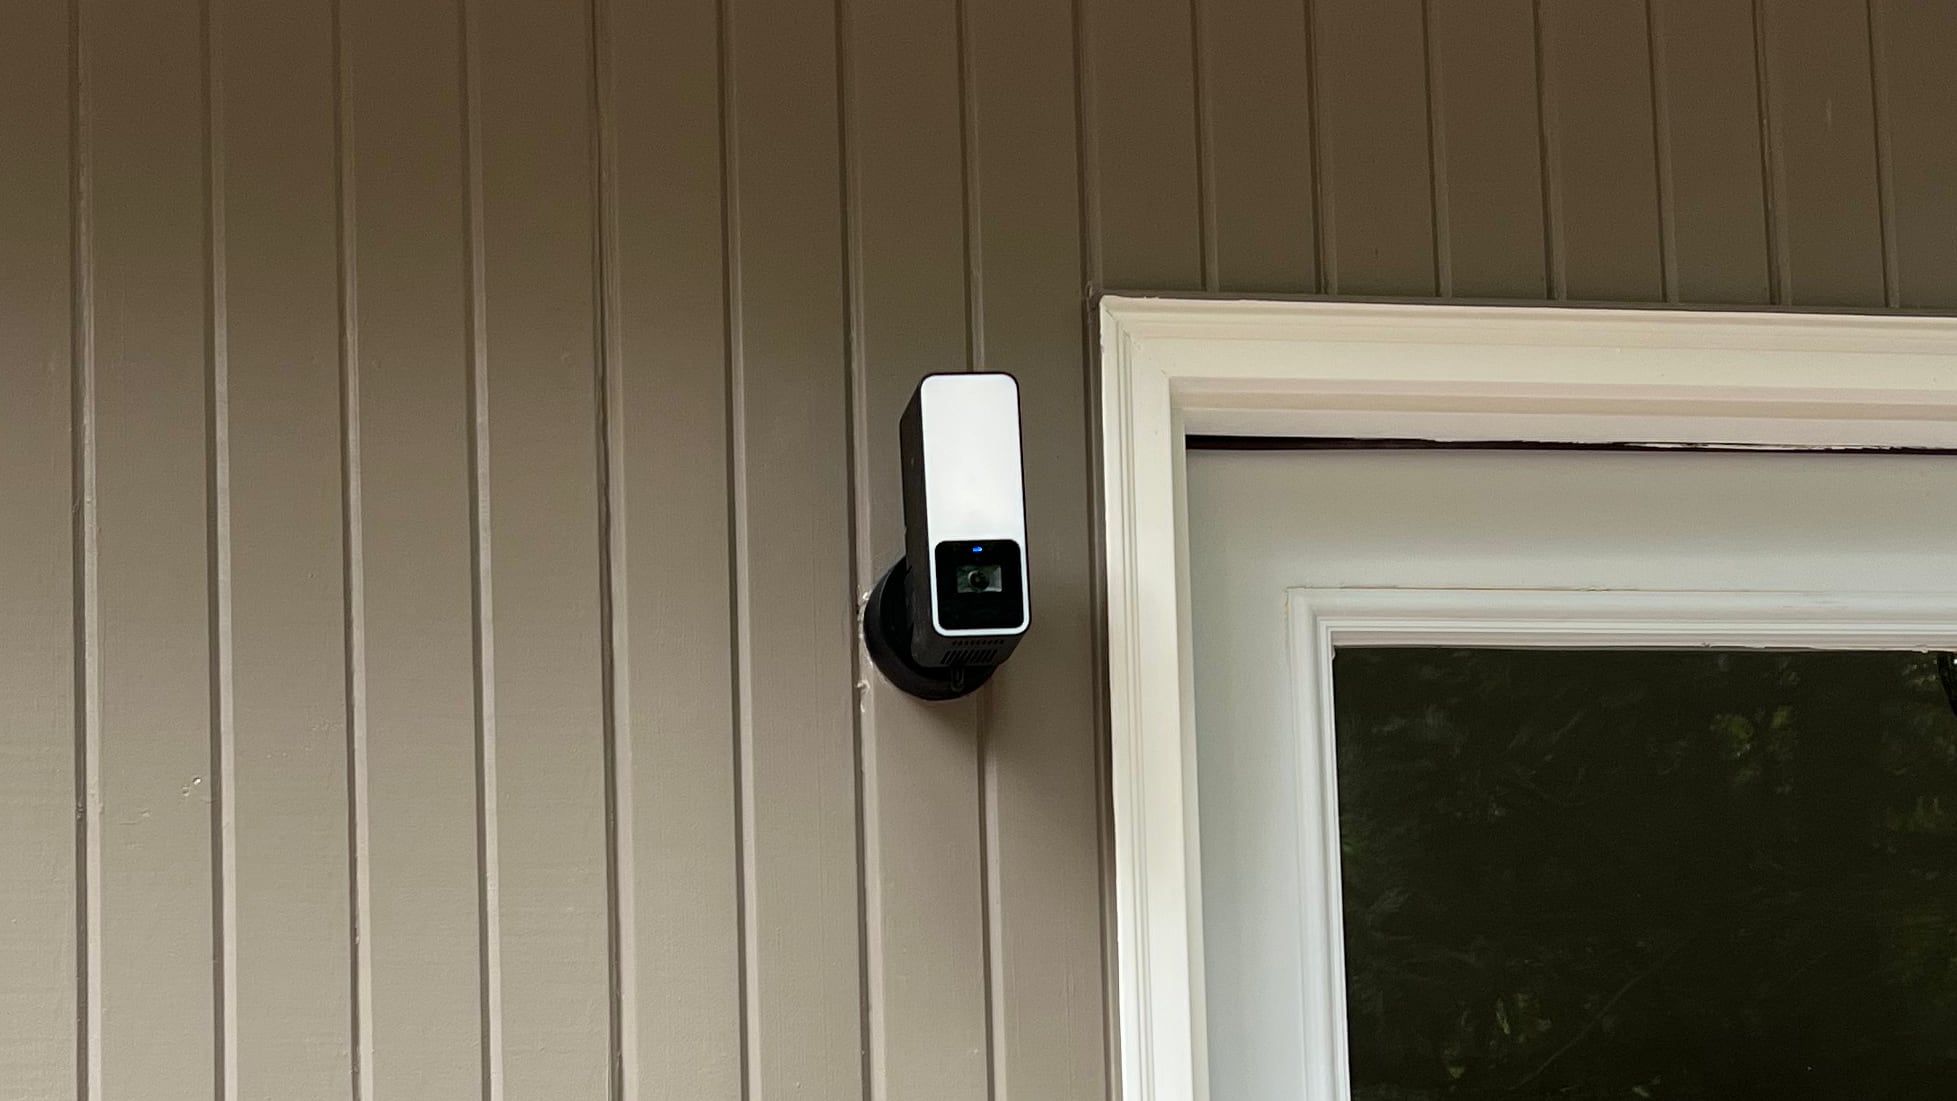 Review: Eve's Outdoor Floodlight Camera Offers Privacy-Focused